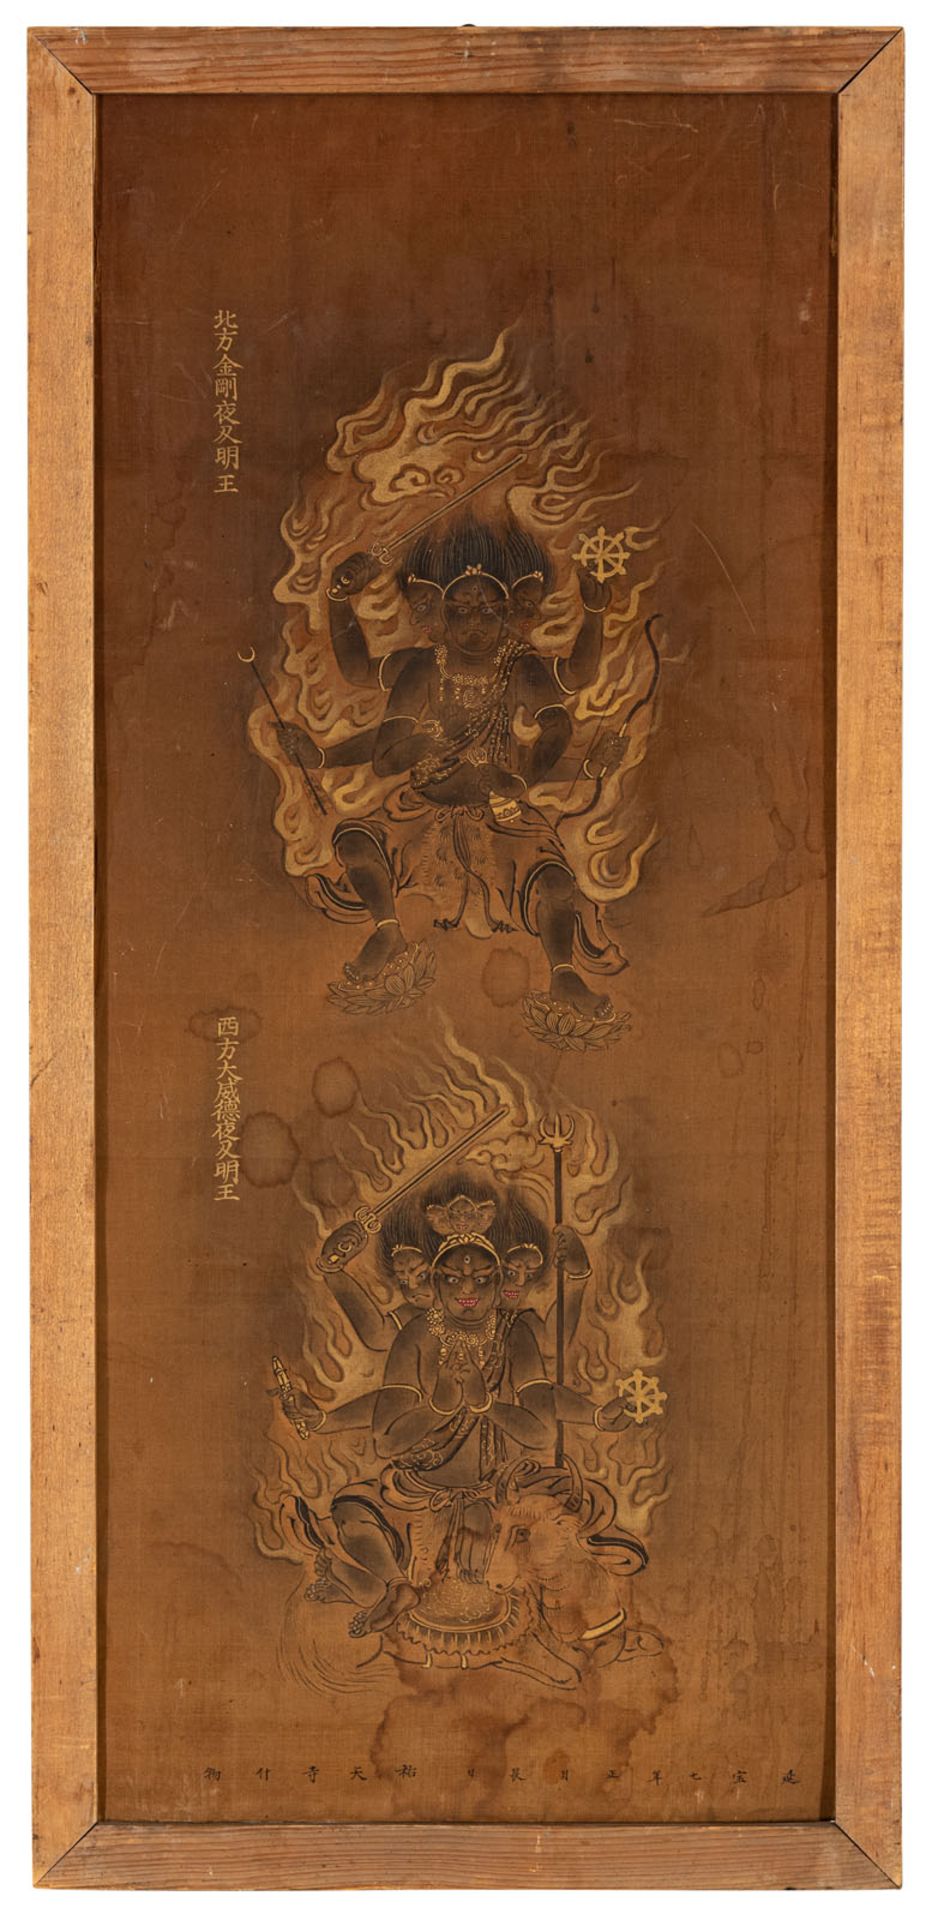 A BUDDHIST PAINTING WITH TWO OF THE FIVE GREAT KINGS OF THE ESOTERIC KNOWNLEDGE (GODAI MYÔÔ) - Image 2 of 3